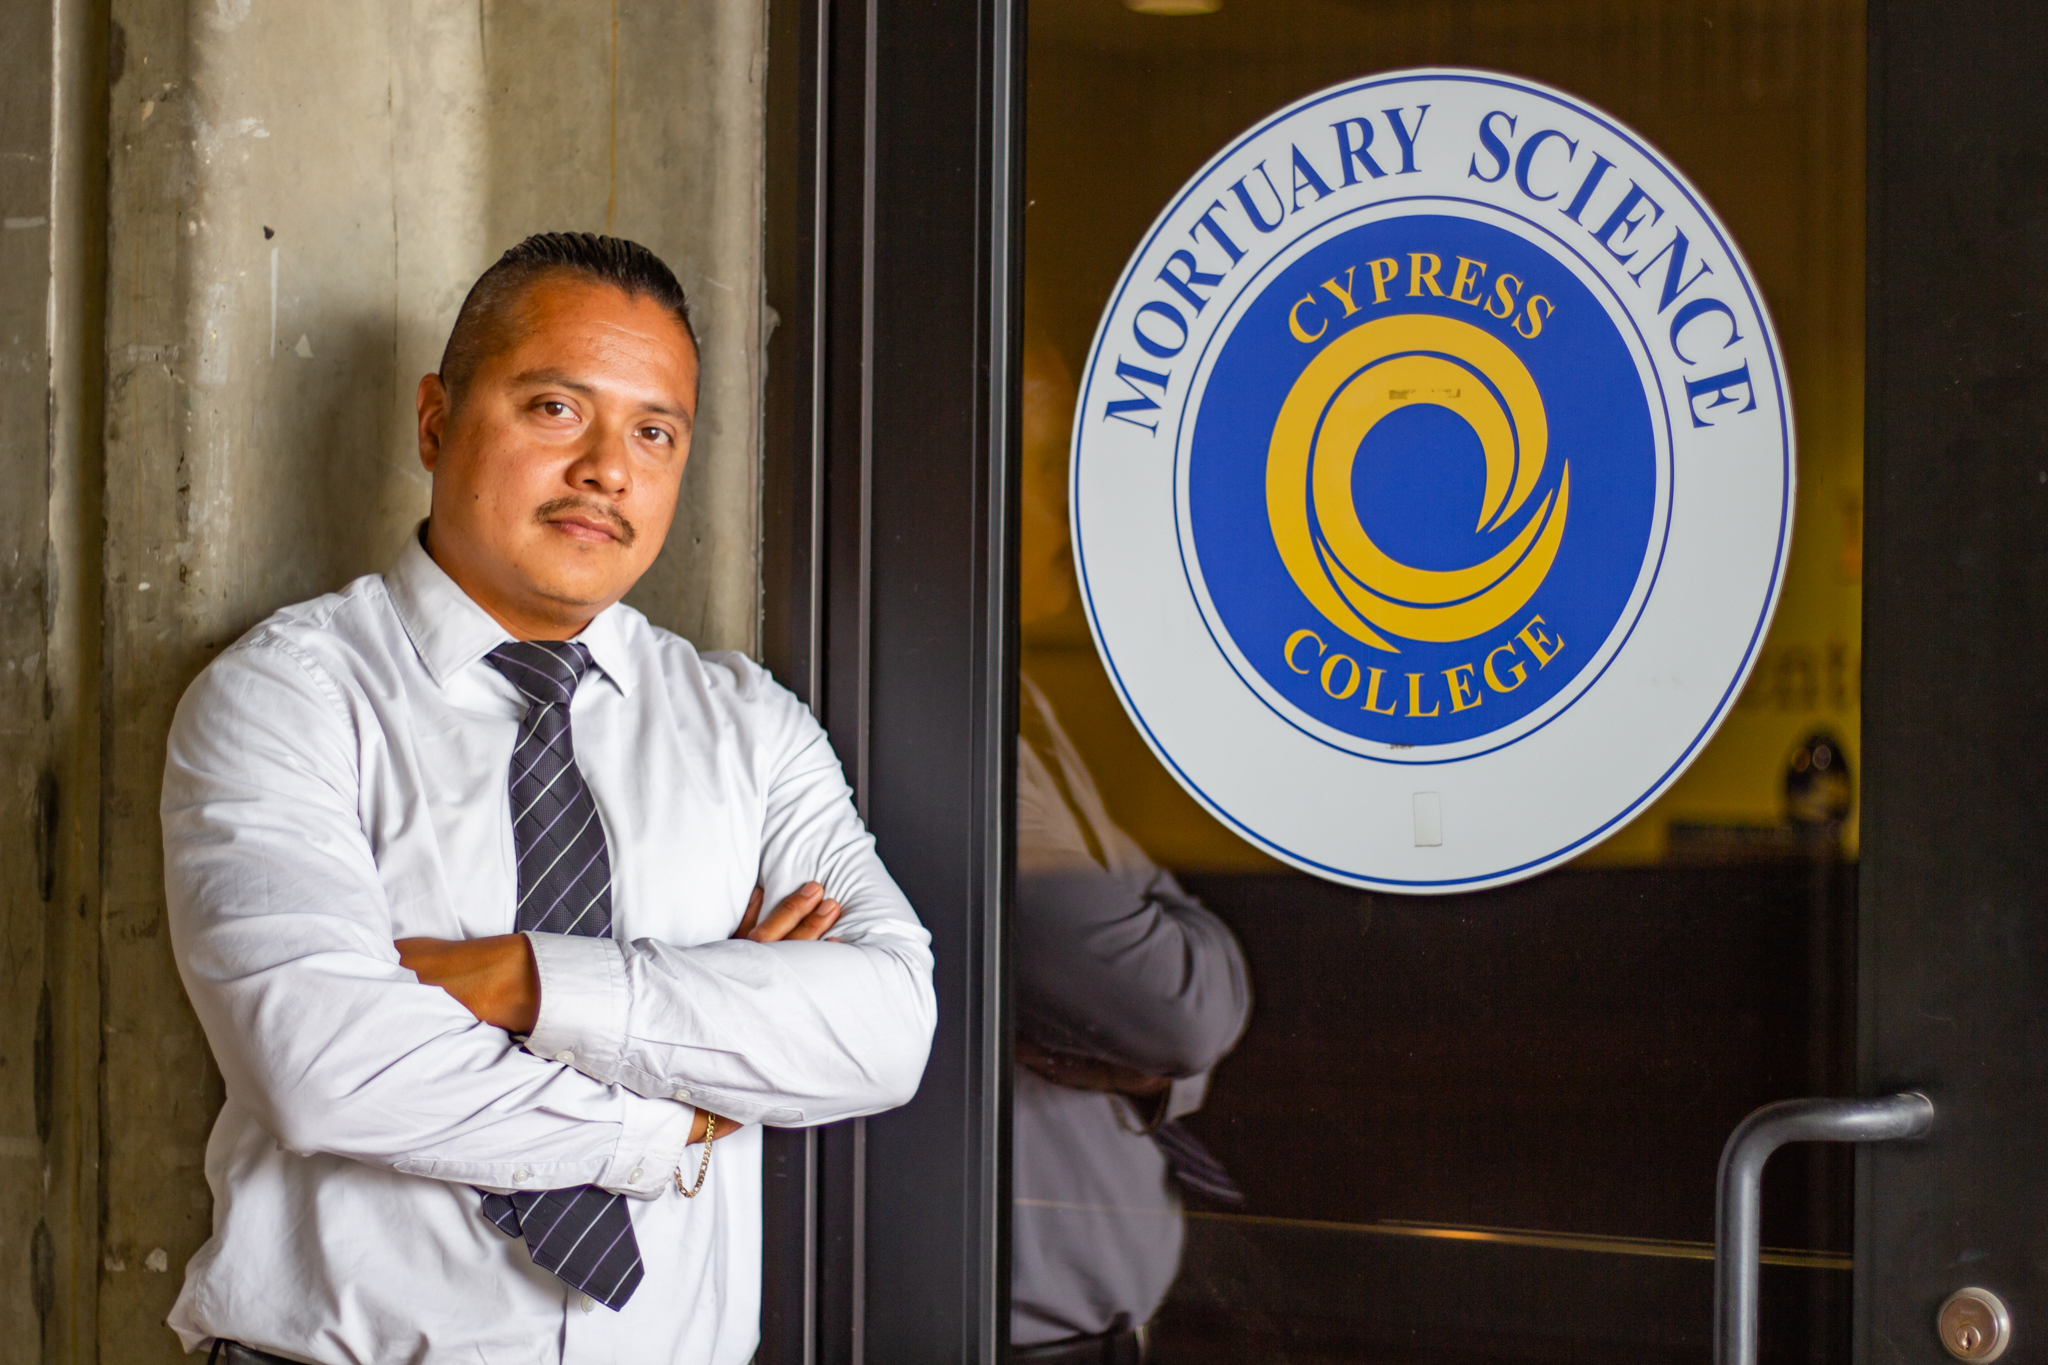 David Garcia stands in front of the Mortuary Science department sign.